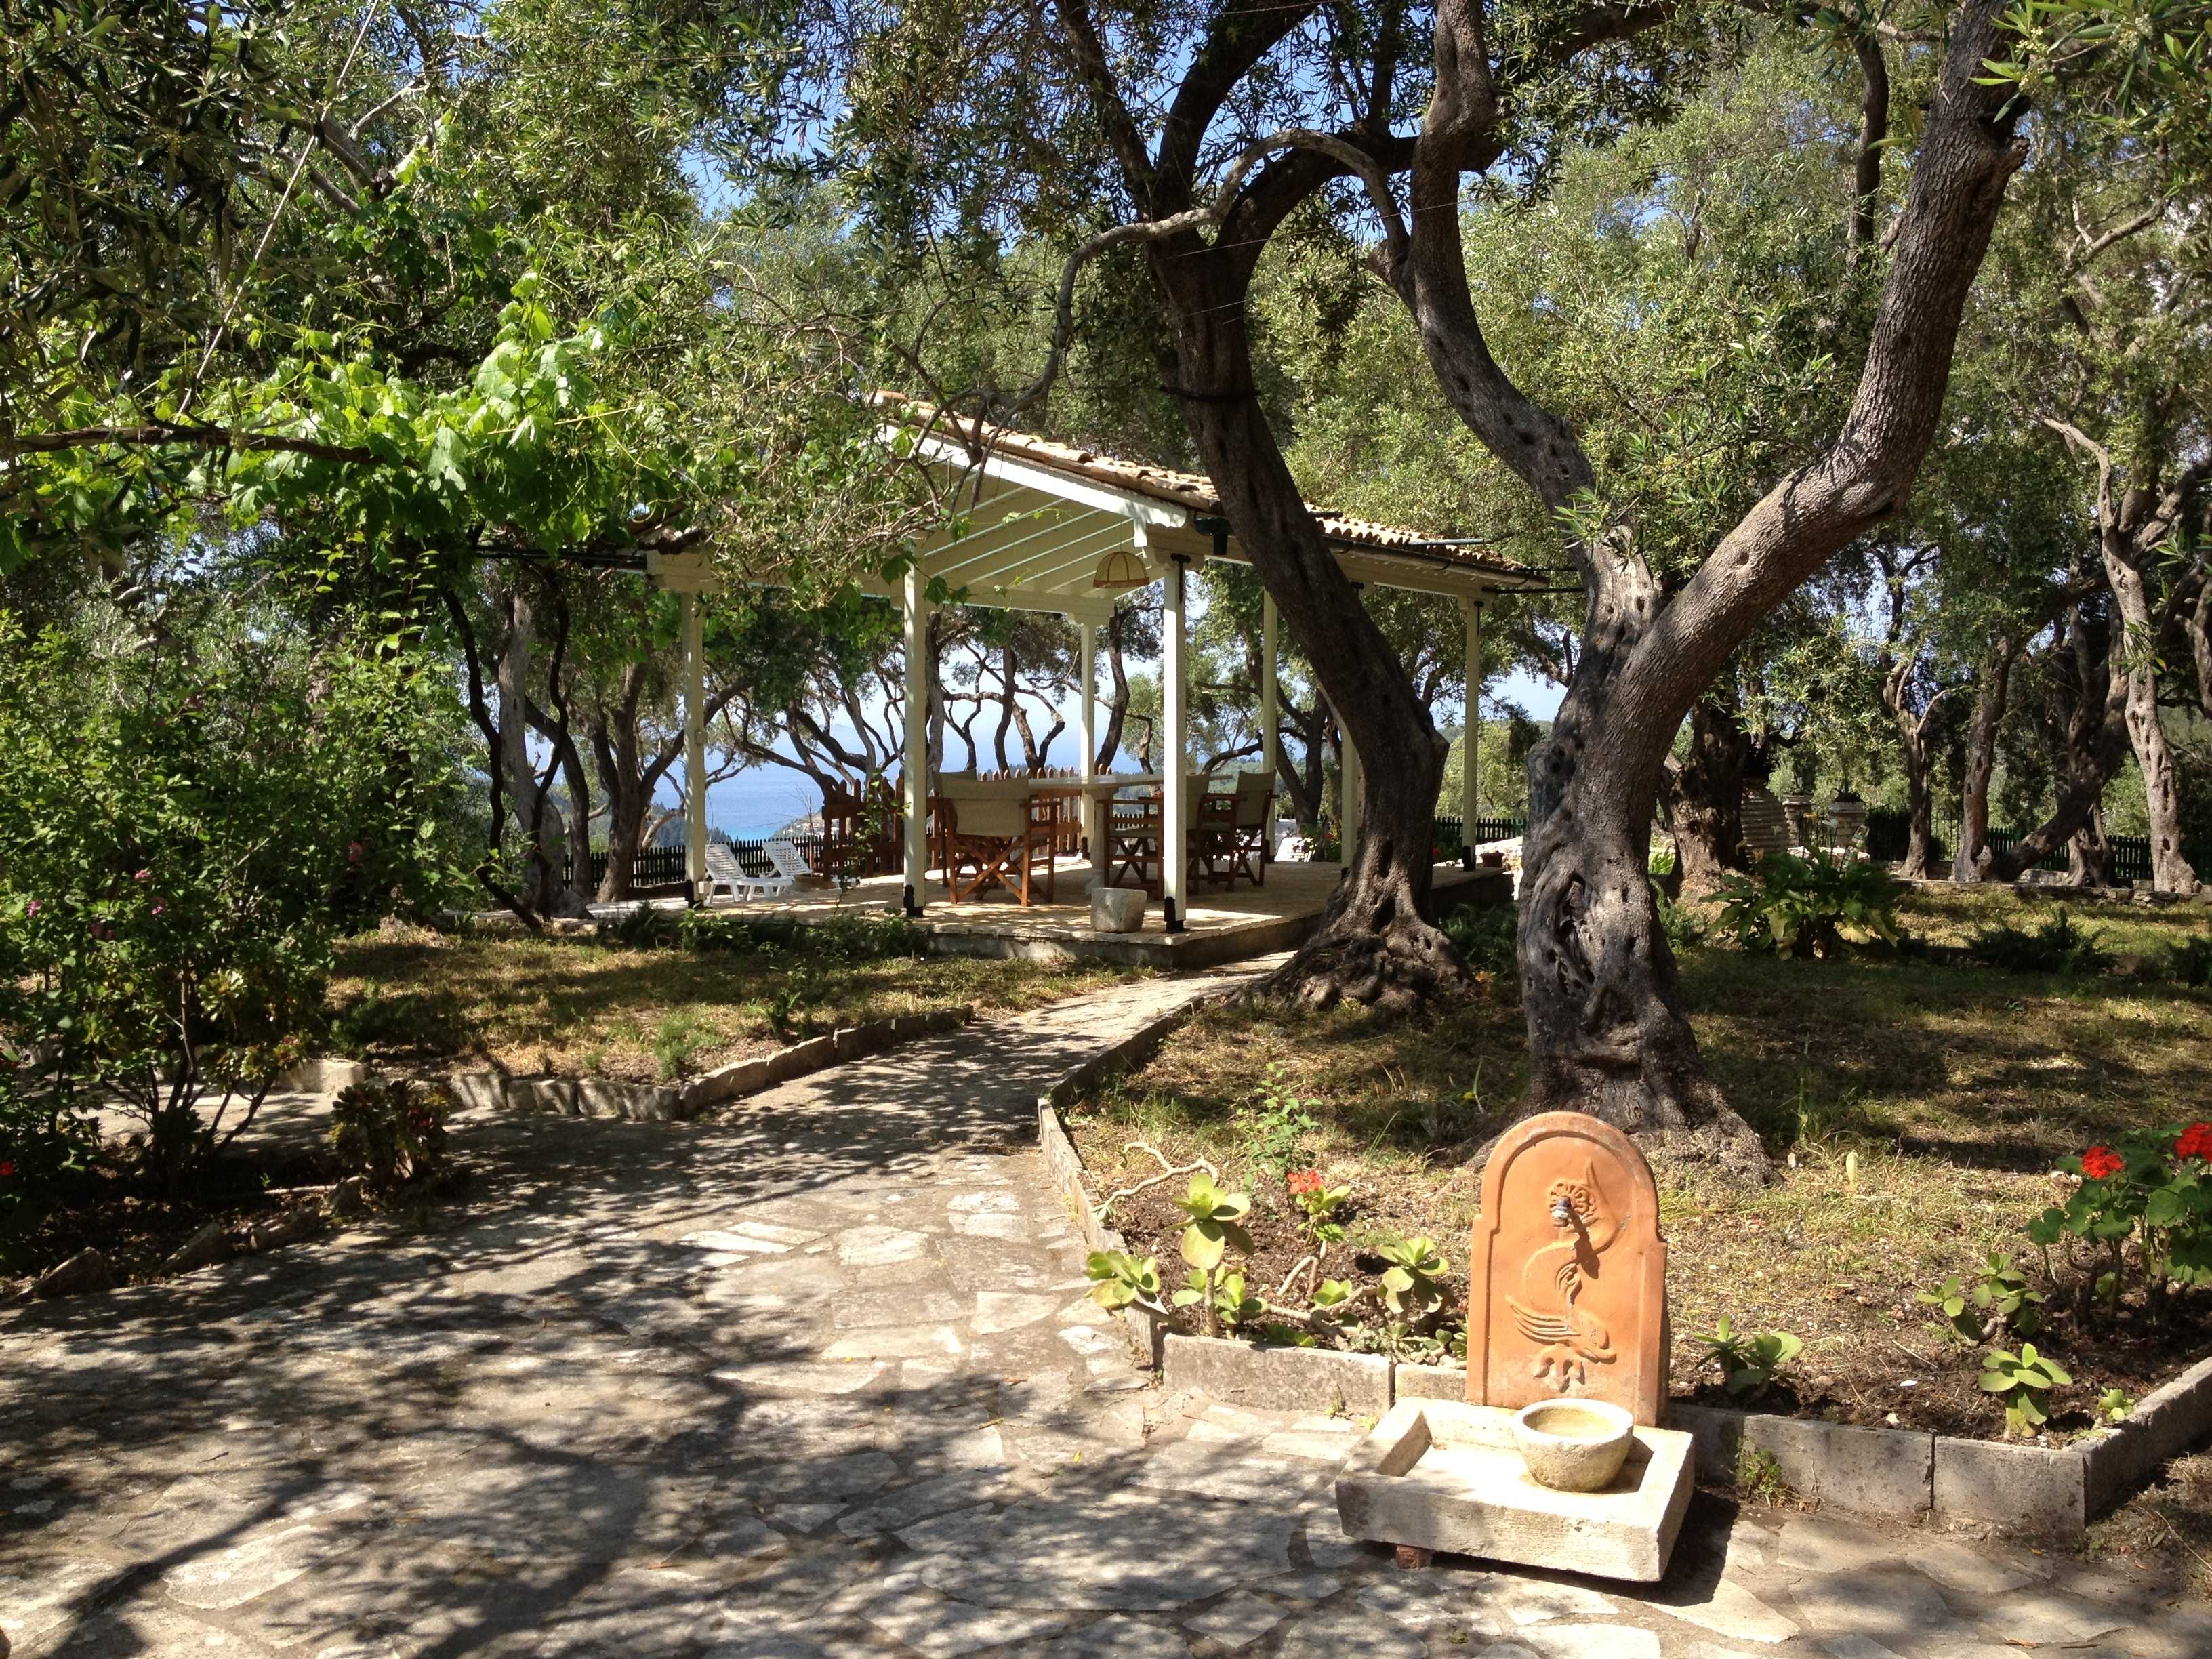 Local history sites in Paxos